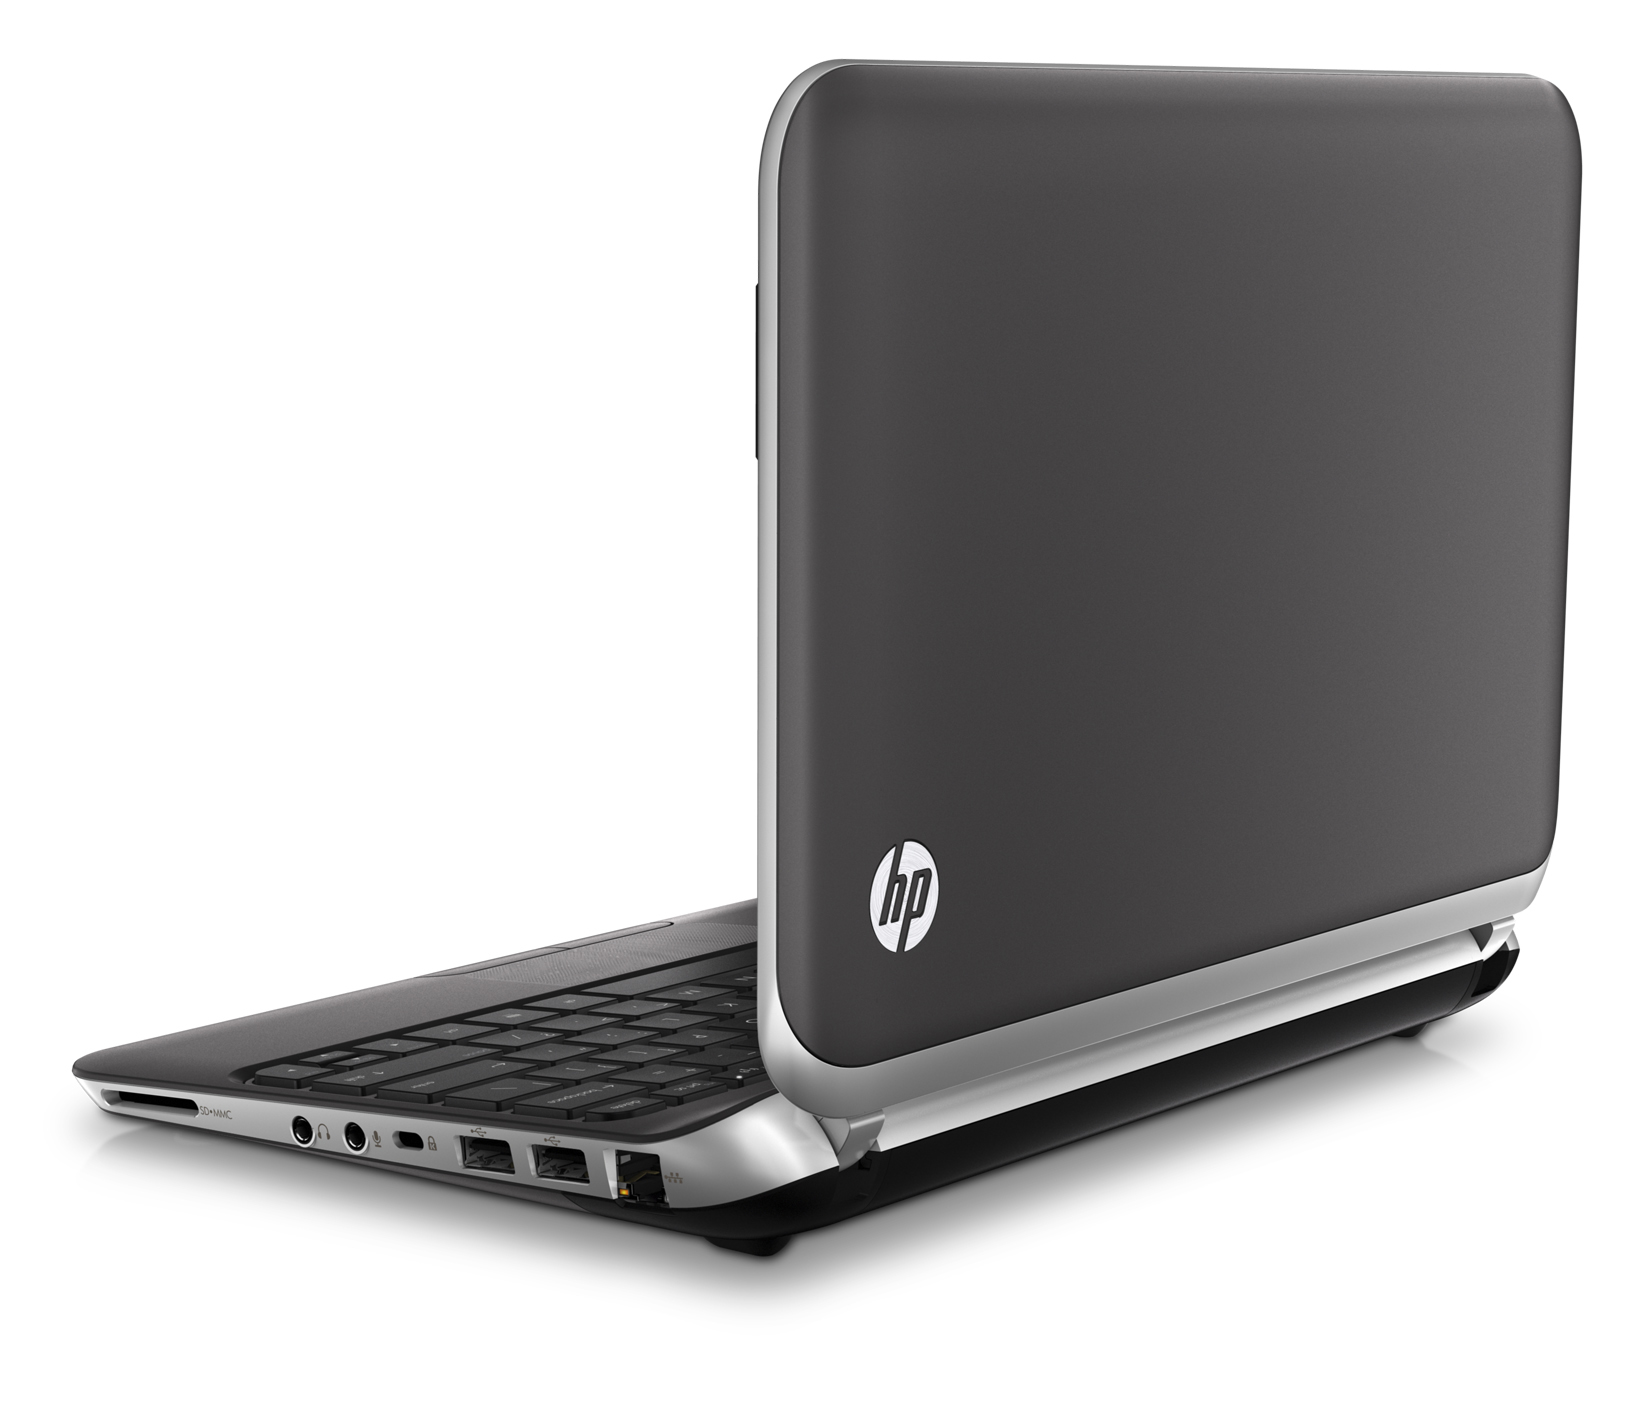 Hp Mini 210 Updated With Beats Audio And New Design Video